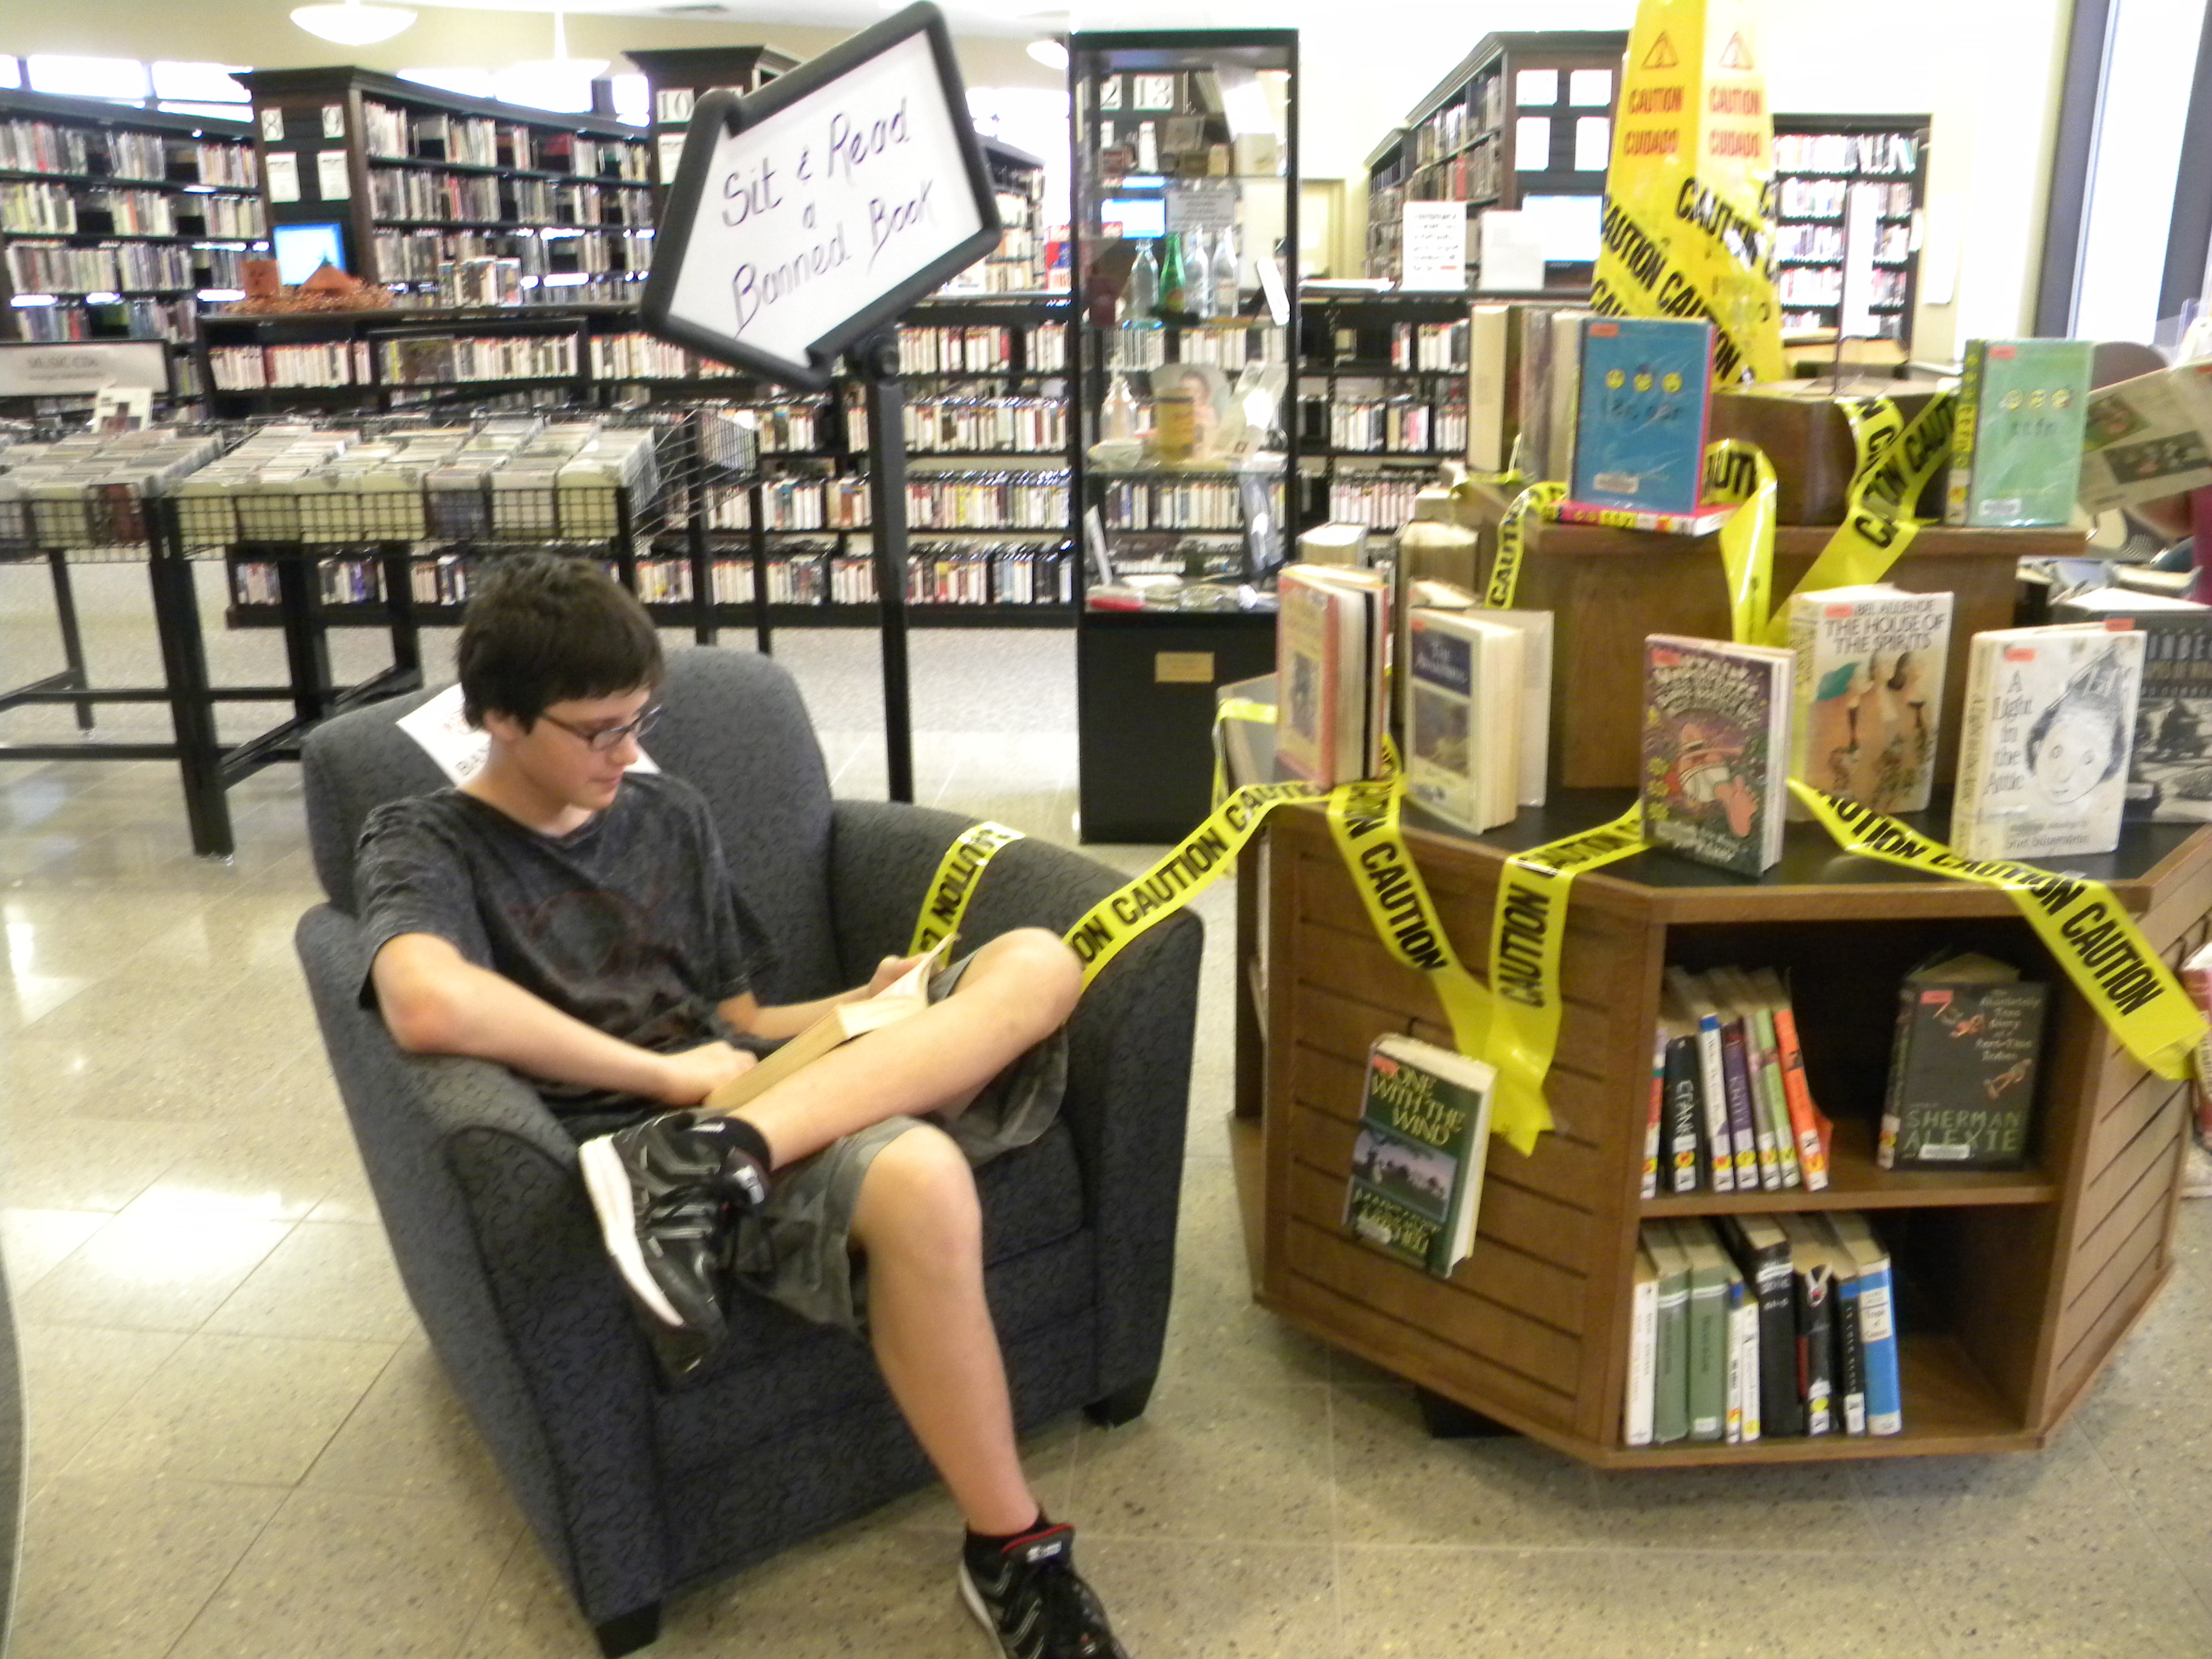 Teen Advisory Group member Danijel Divkovic reads a banned book in the display area at Guthrie Memorial Library in Hanover, Pennsylvania.